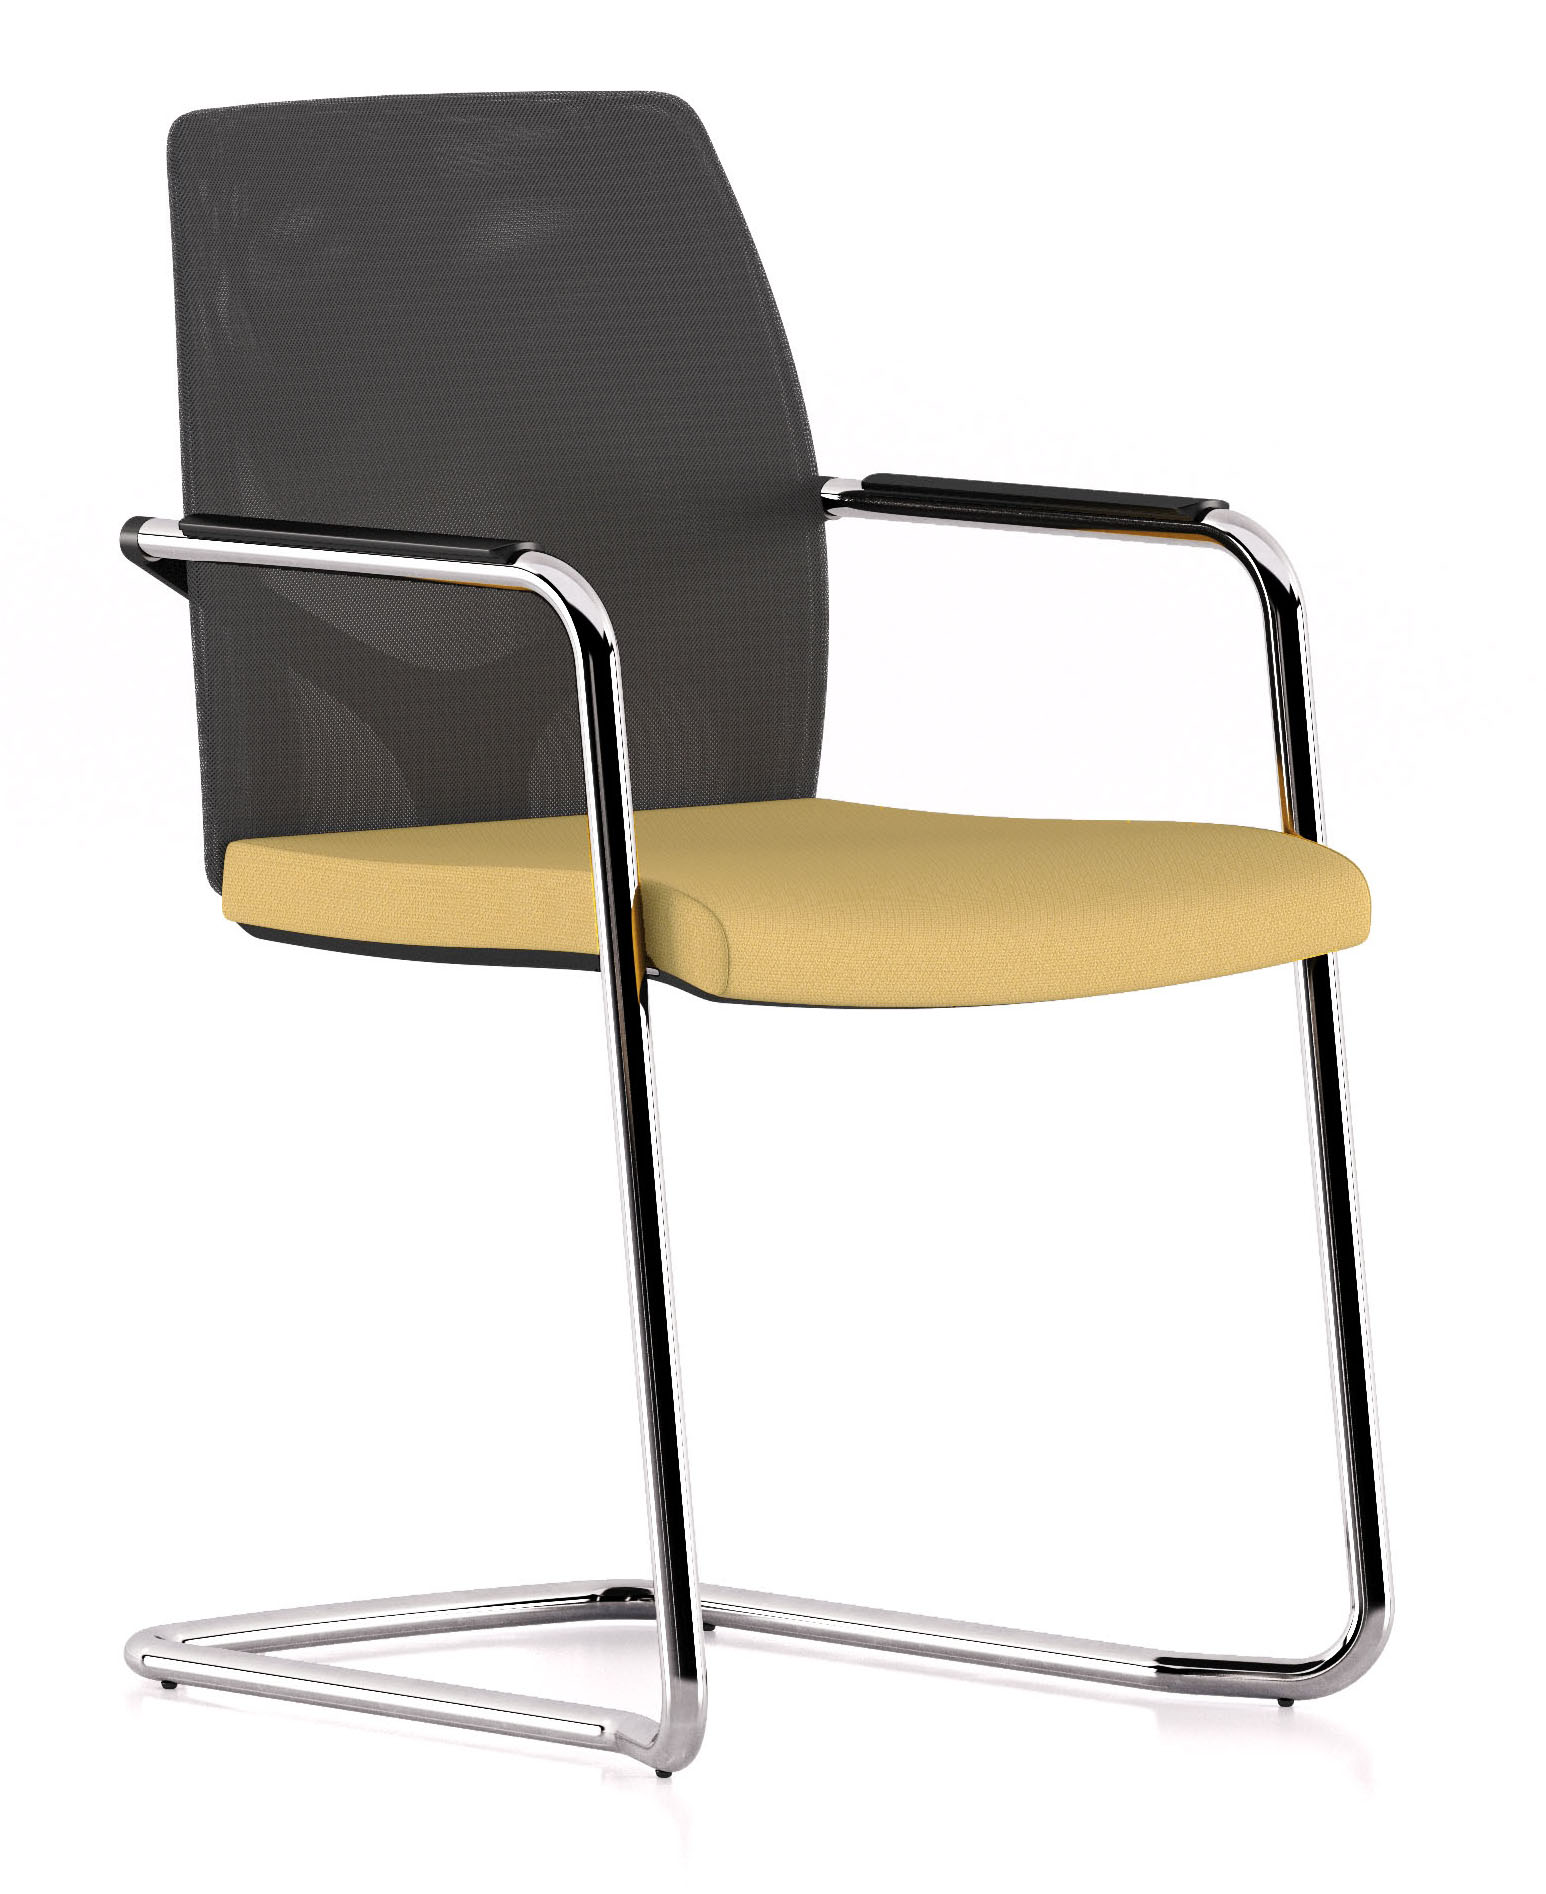 Easyback Cantilever Office Chair